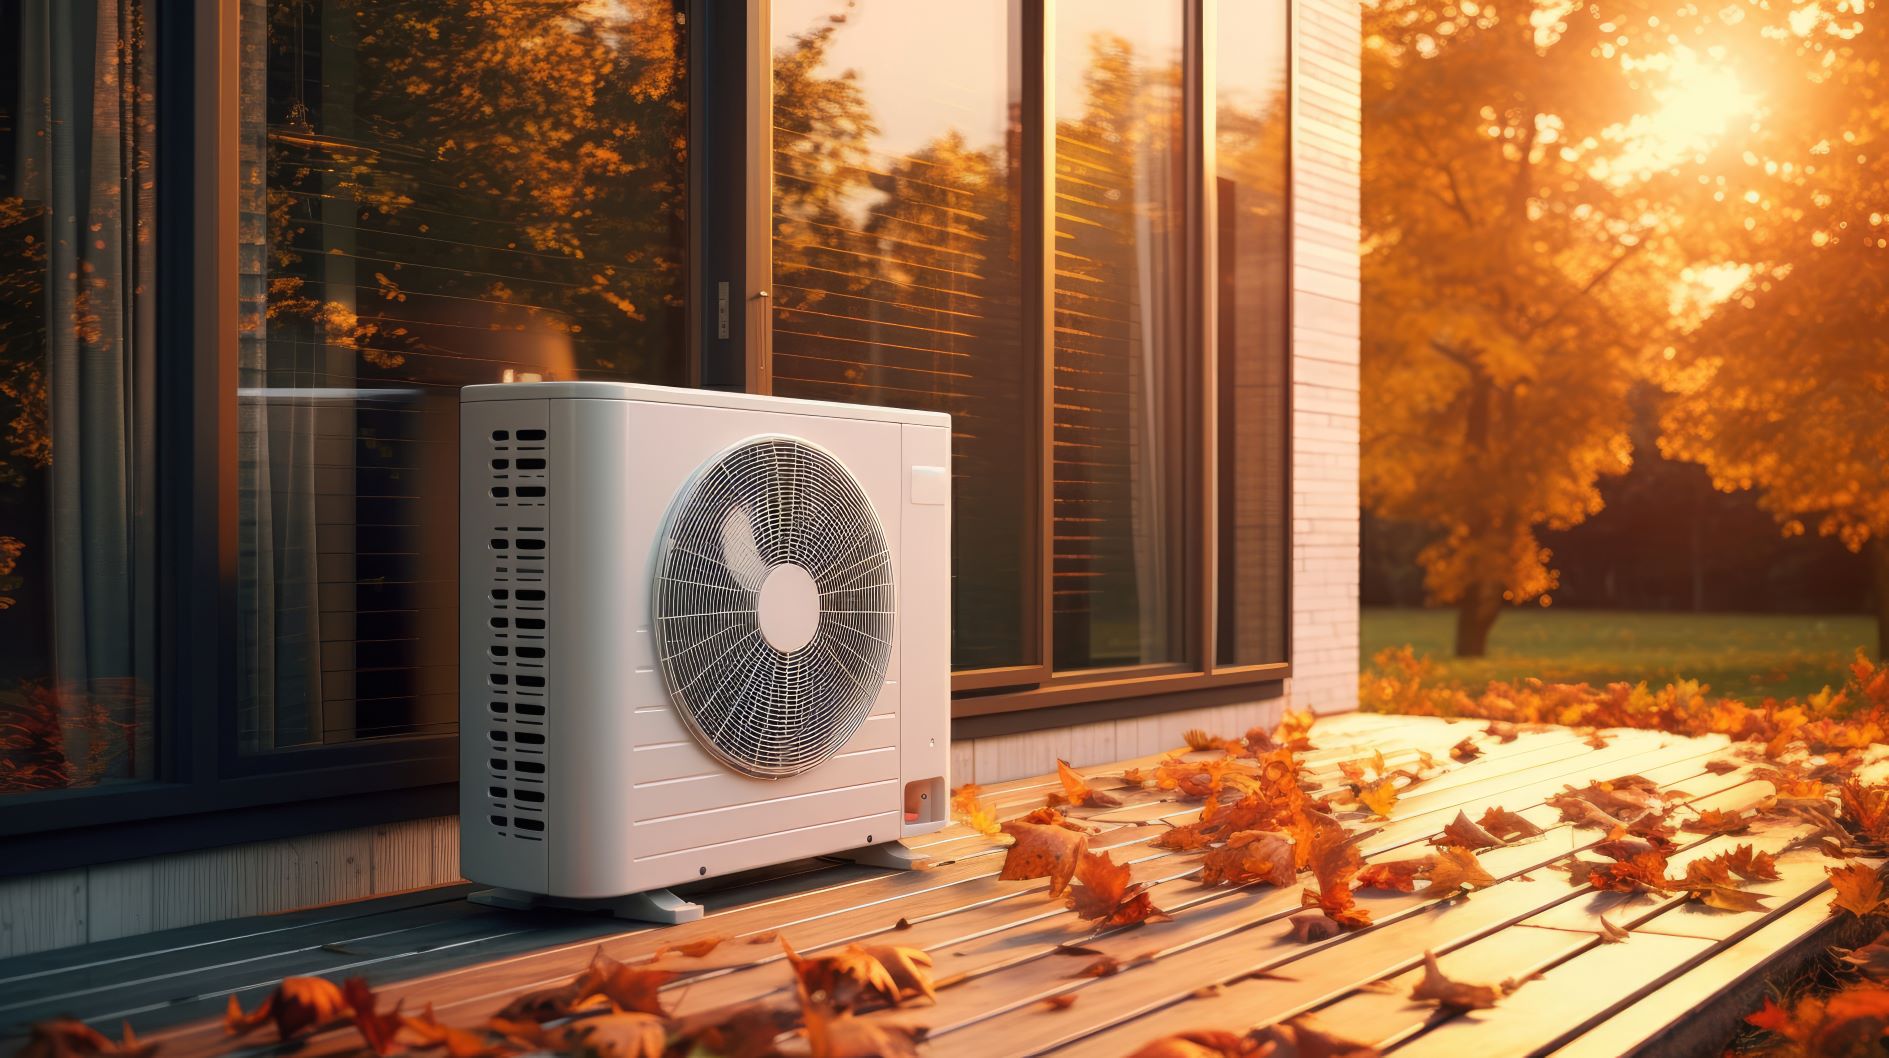 Debunking the Myths About Heat Pumps